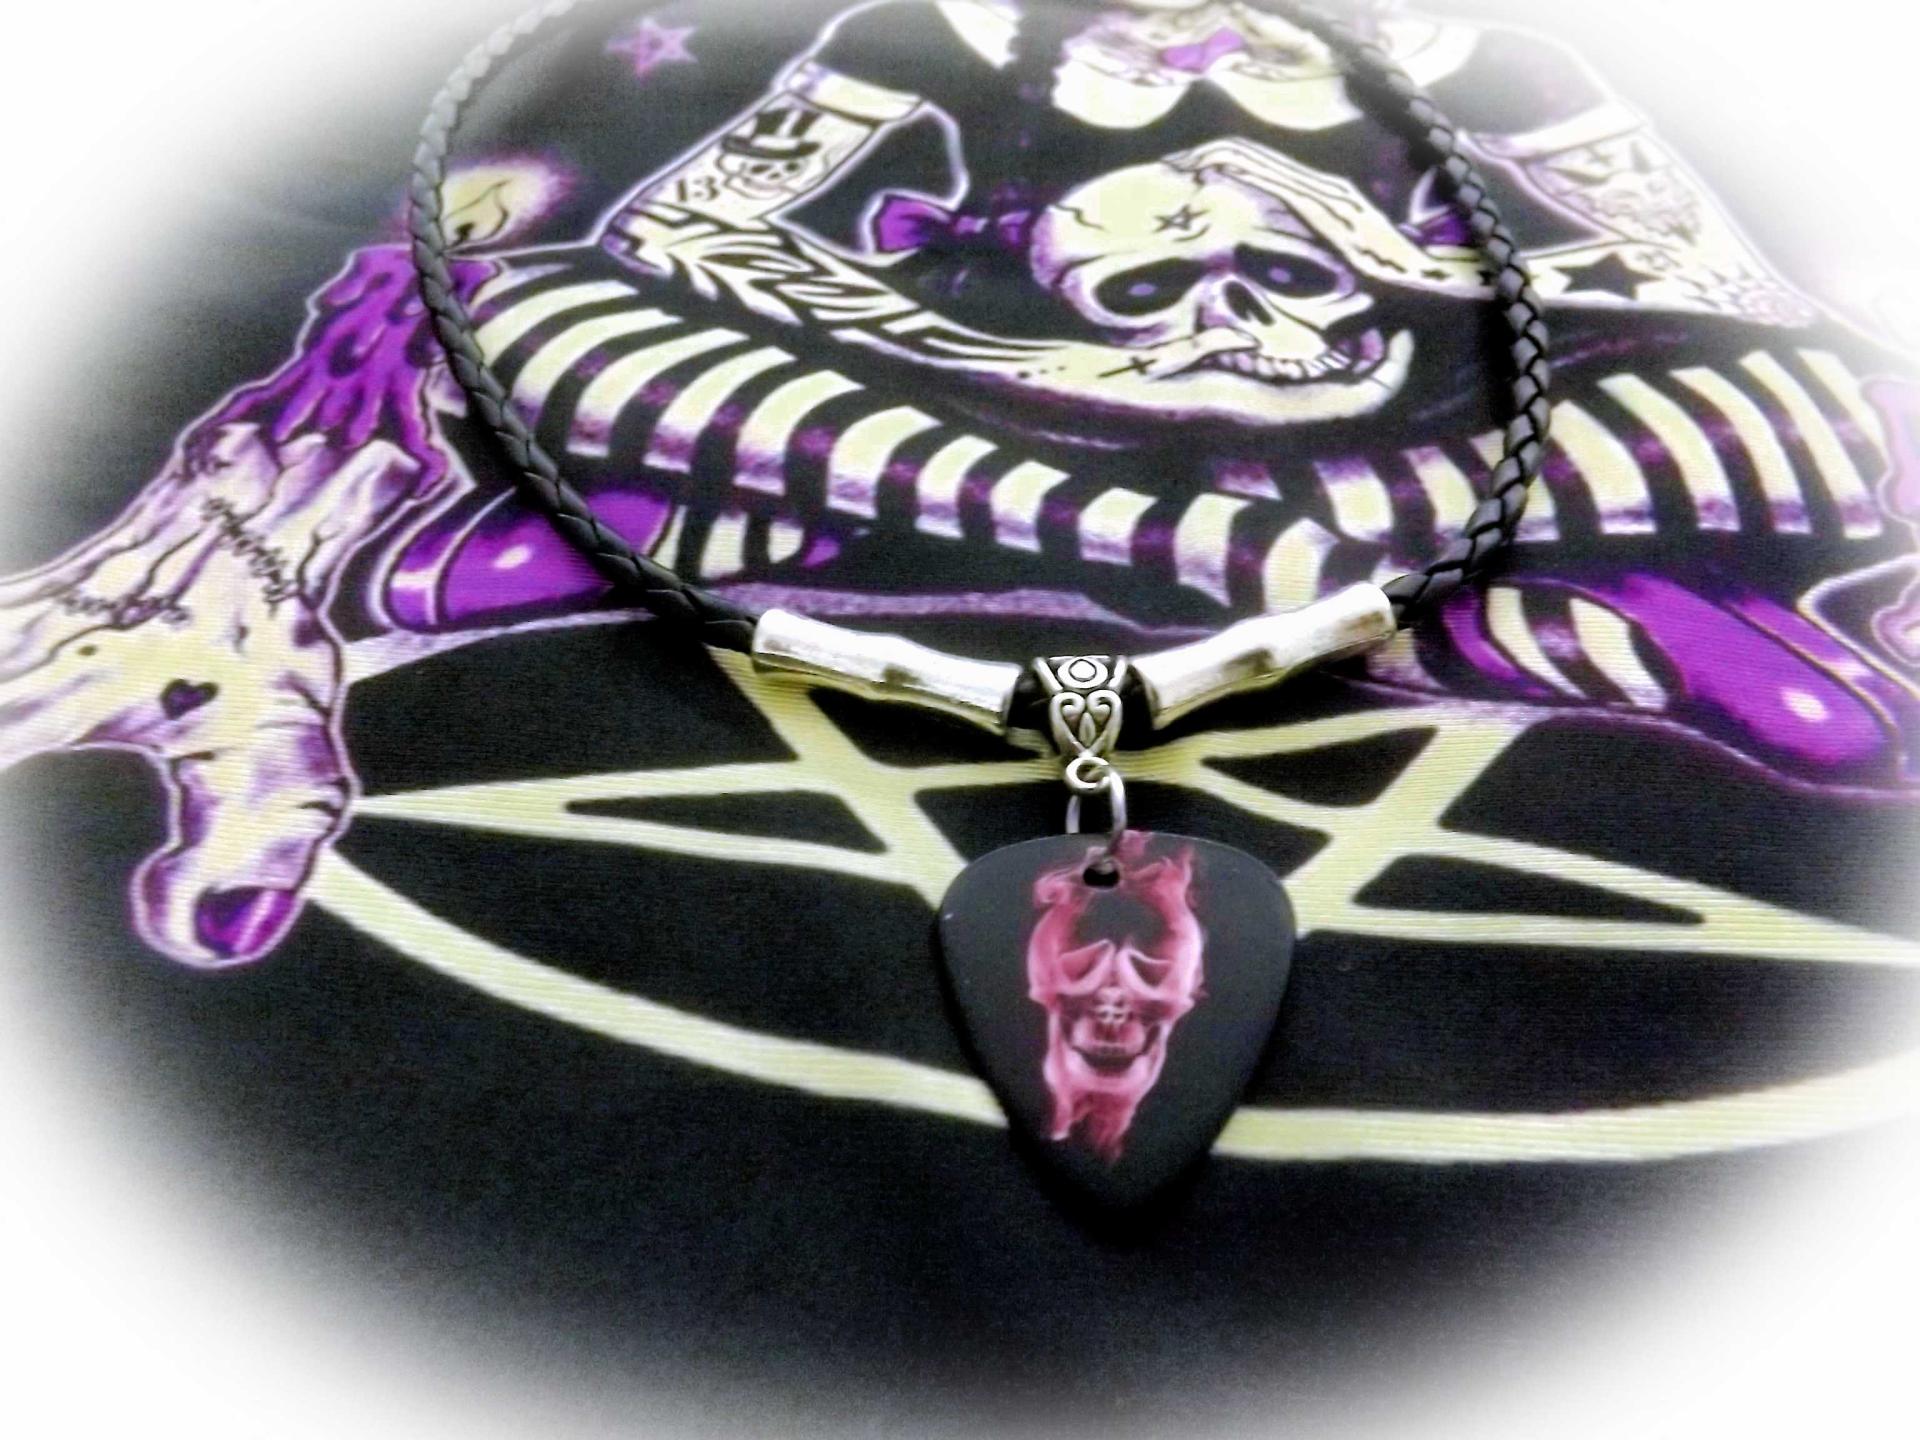 Guitar Pick Choker Necklace With Skull Theme